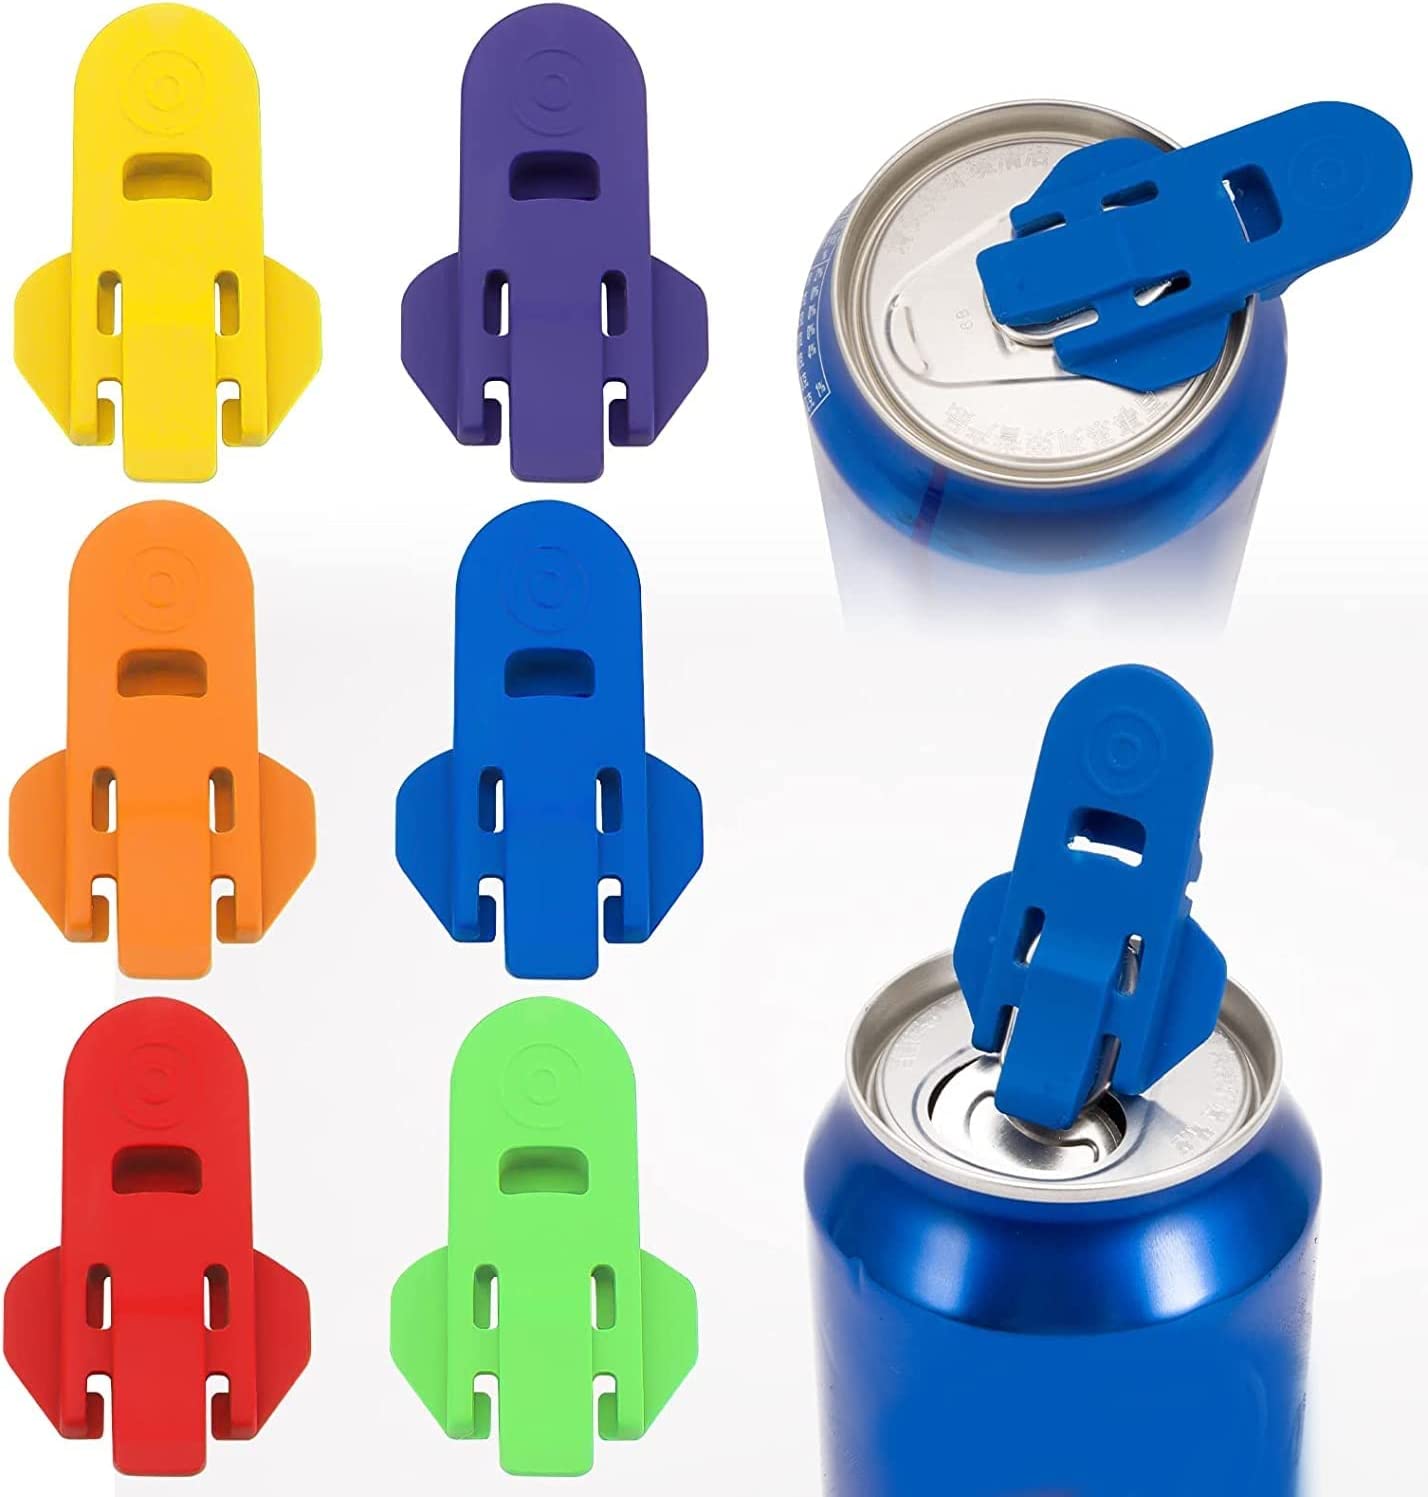 Assorted Soda Can Cover & Tab Opener Set (6 Pack) – Plastic Can Covers to Open & Keep Drinks Carbonated & Bug-Free